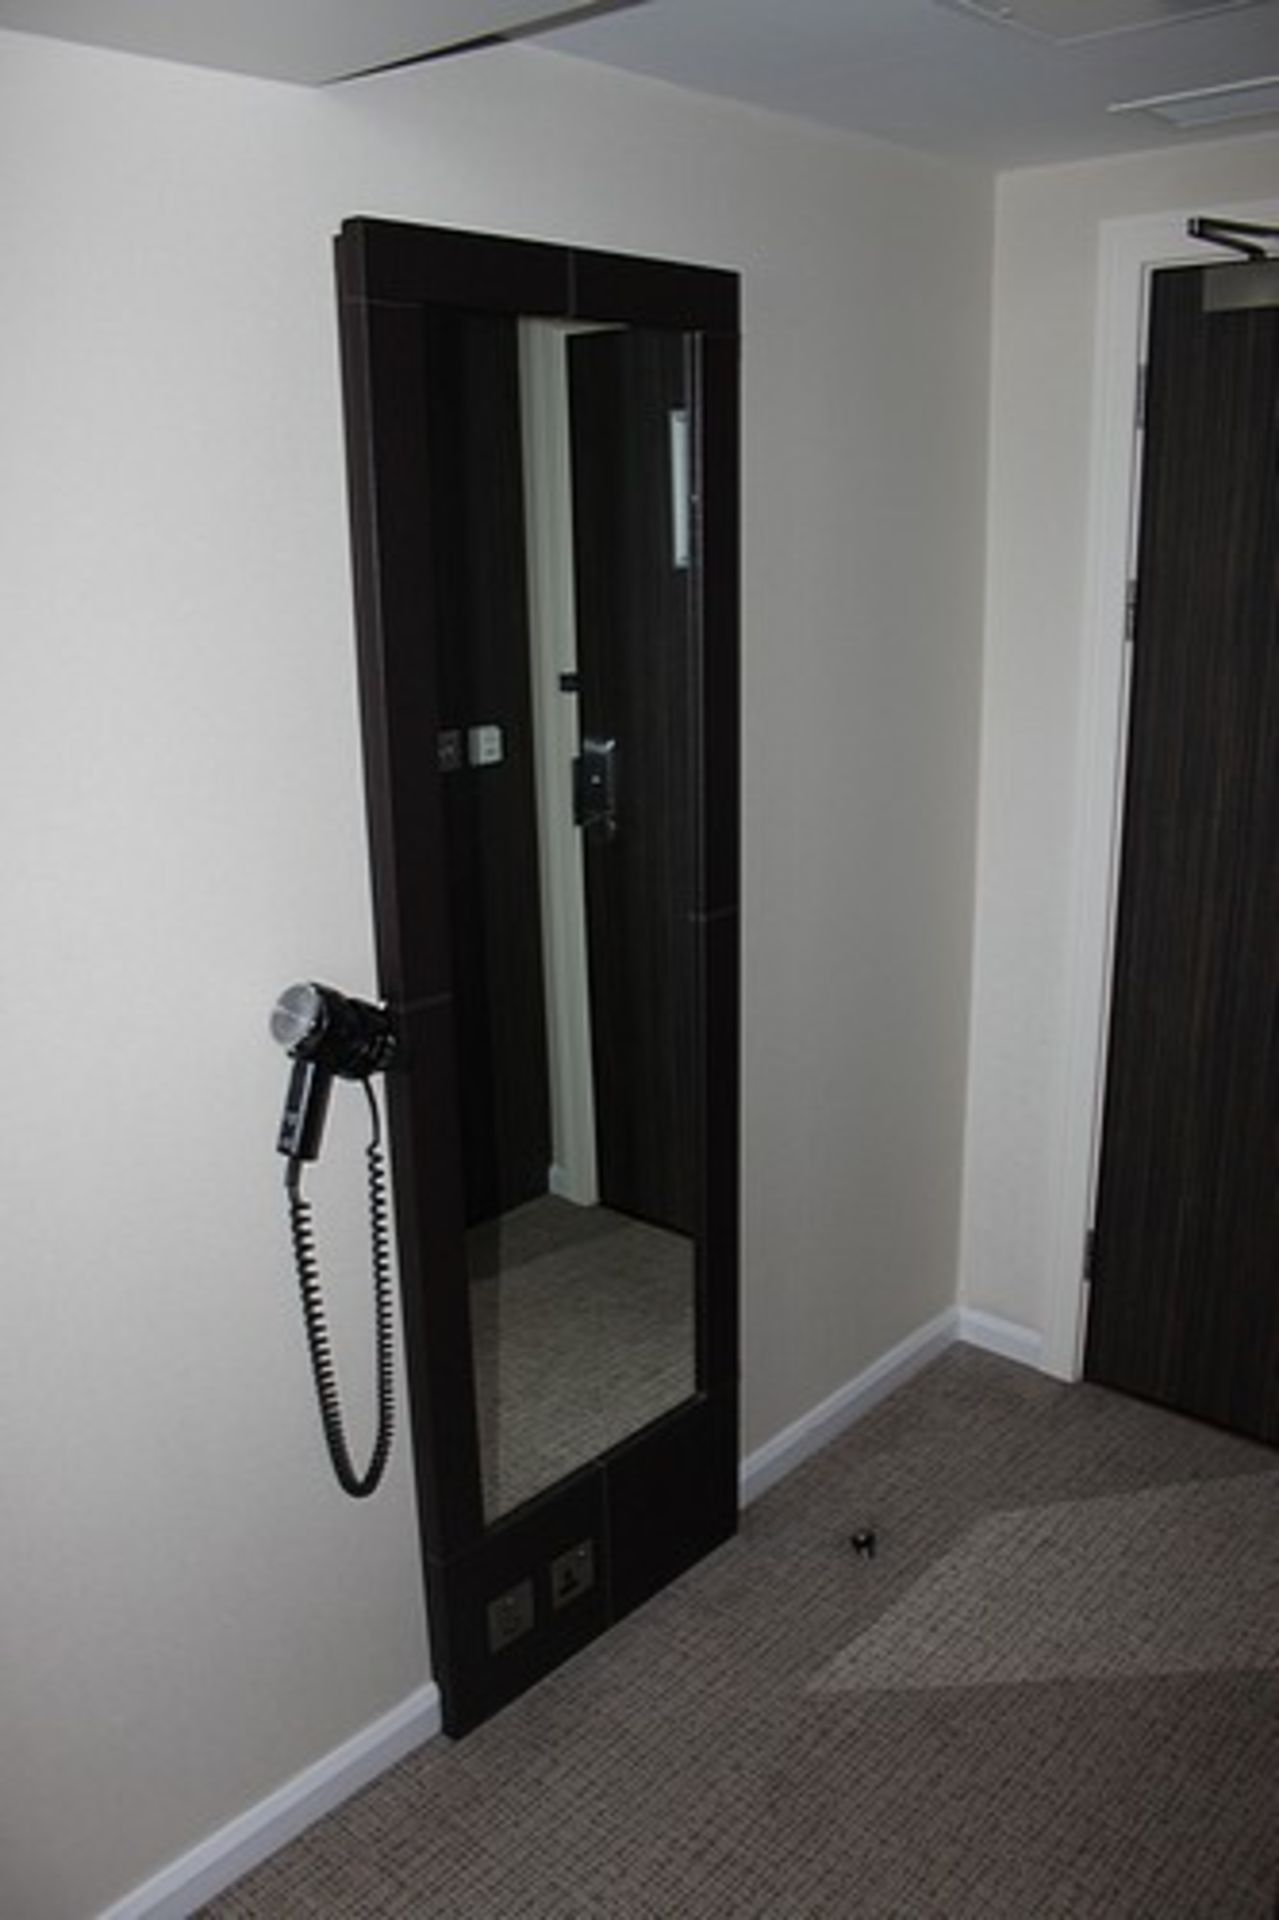 Curtis Contract Furniture Full Length Dress Mirror Brown 534 (w) x 50 (d) x 2150mm (h) (Exec) - Image 2 of 3